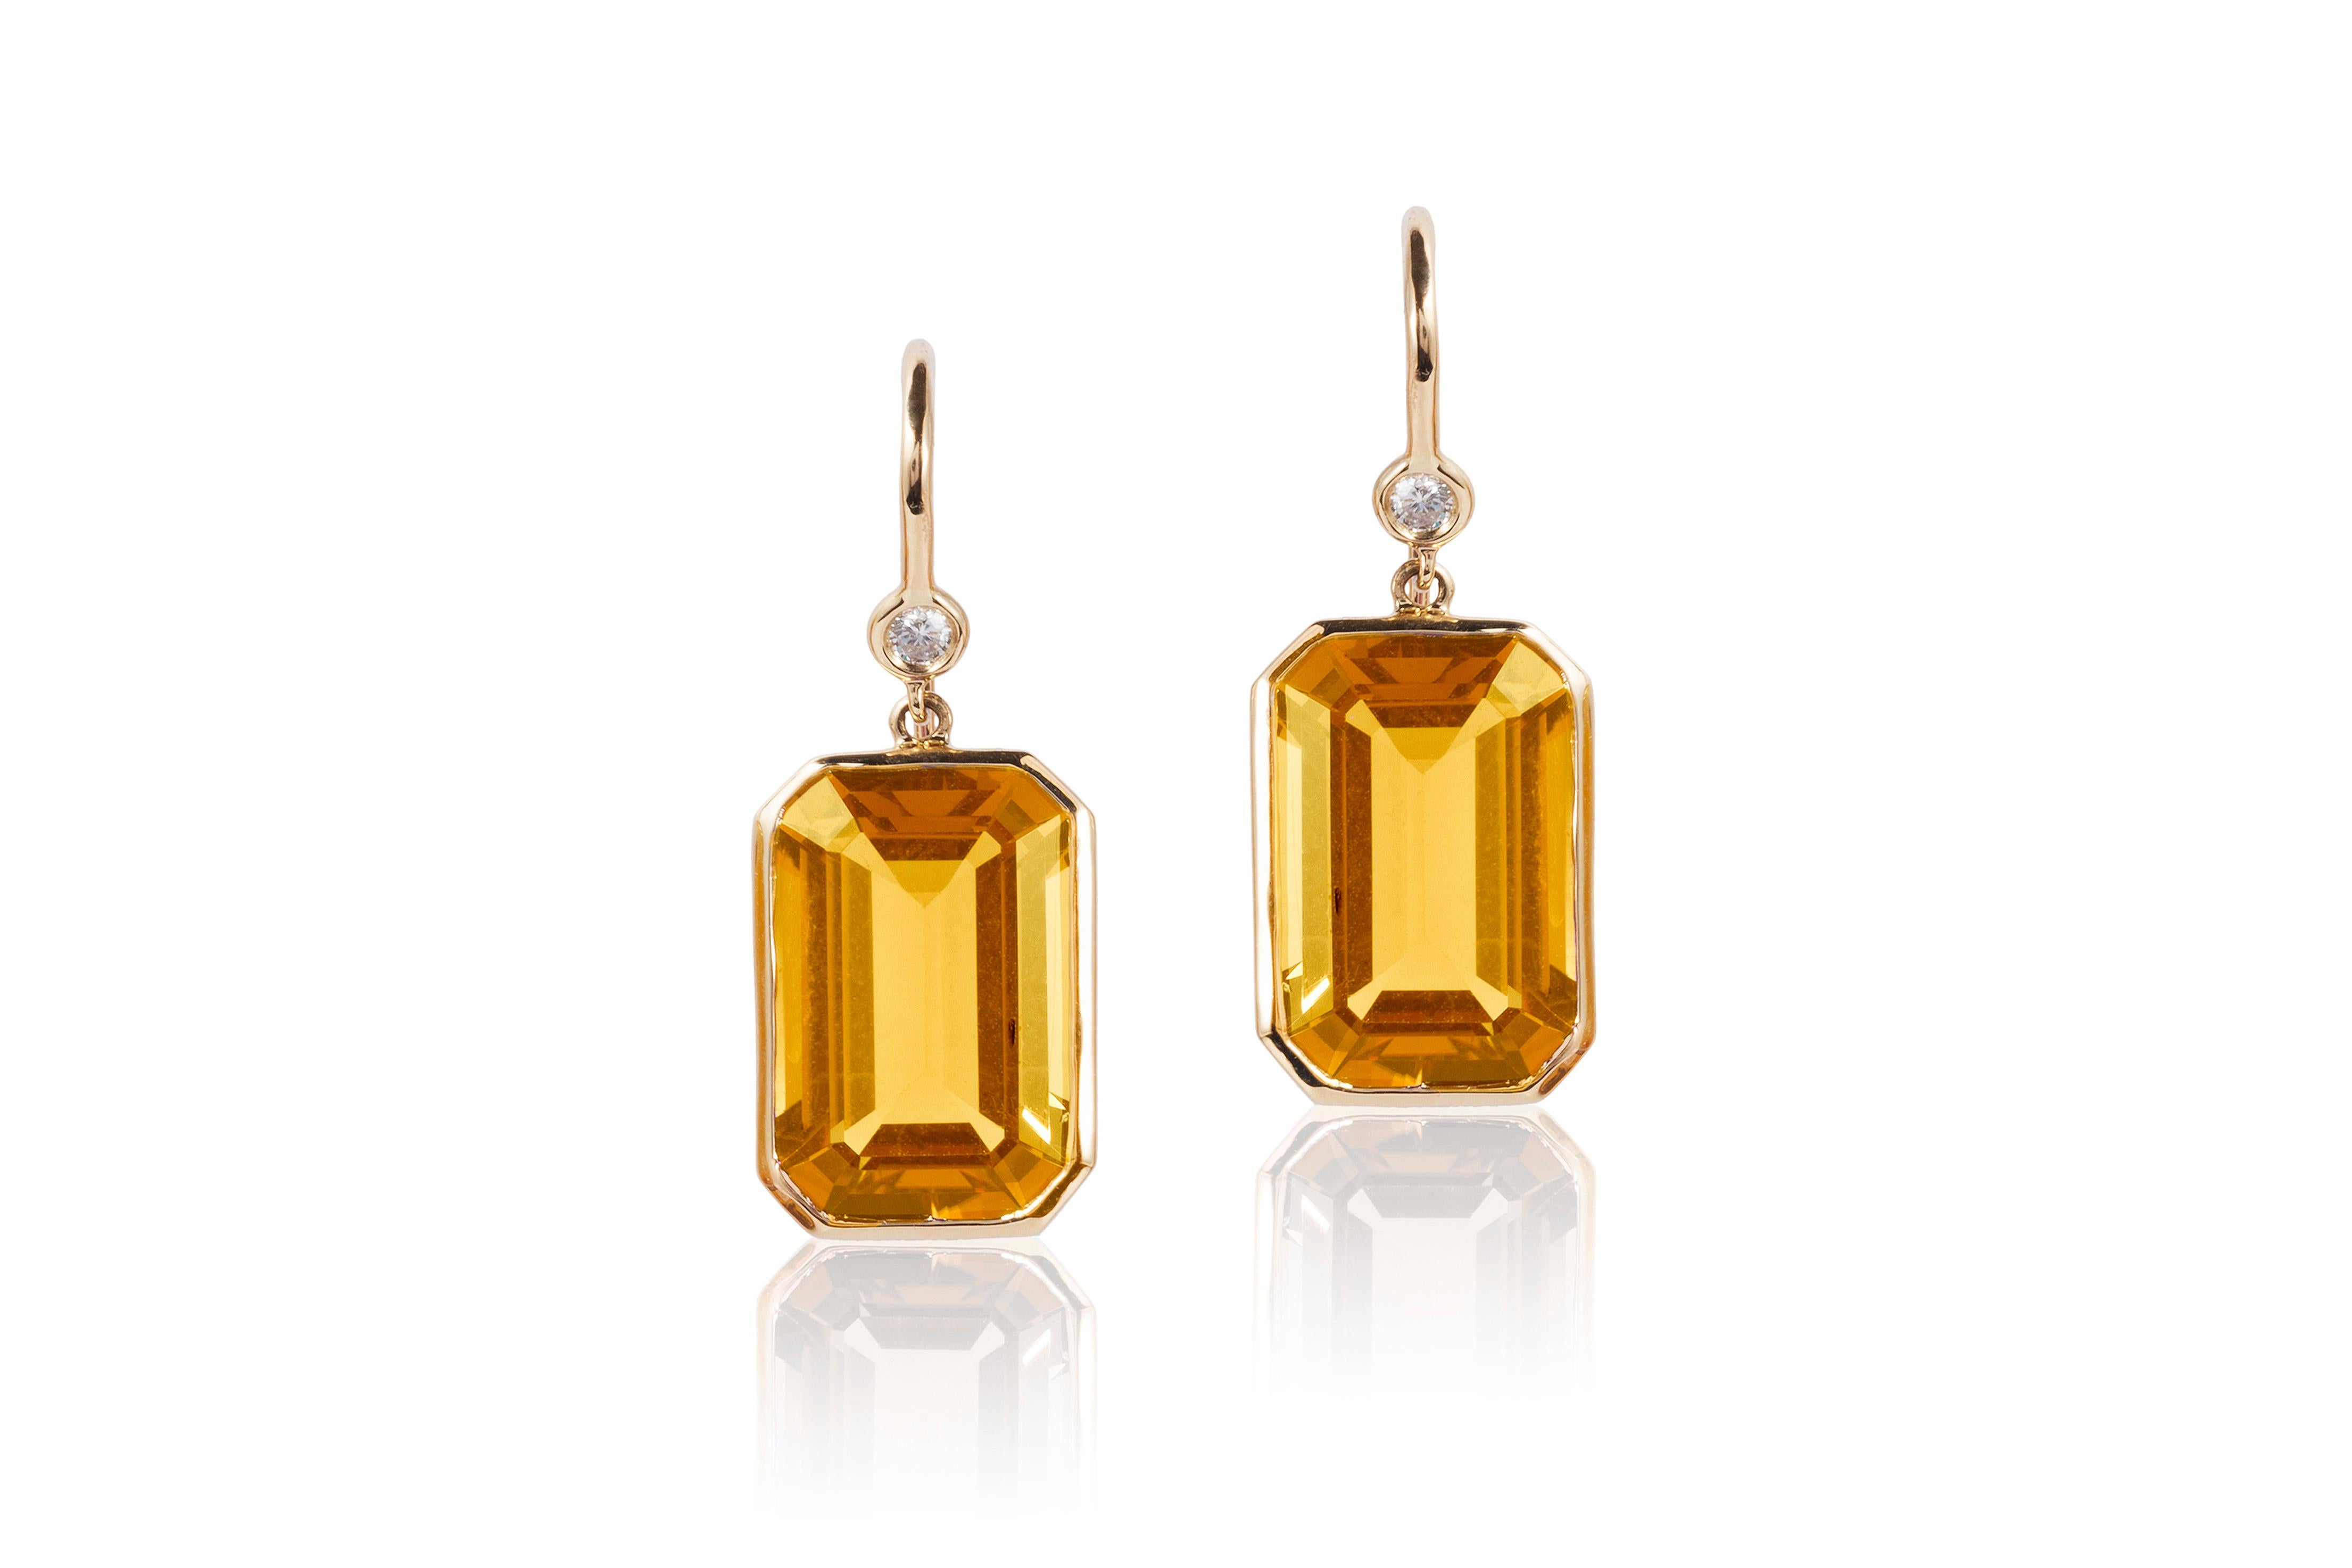 Citrine 3 Stone Emerald Cut Ring in 18K Yellow Gold from 'Gossip' Collection

Stone Size: 13 x 7 mm

Gemstone Approx. Wt: Citrine- 11.16 Carats.



Citrine Emerald Cut Earrings with Diamond on Wire in 18K Yellow Gold from 'Gossip' Collection

Stone